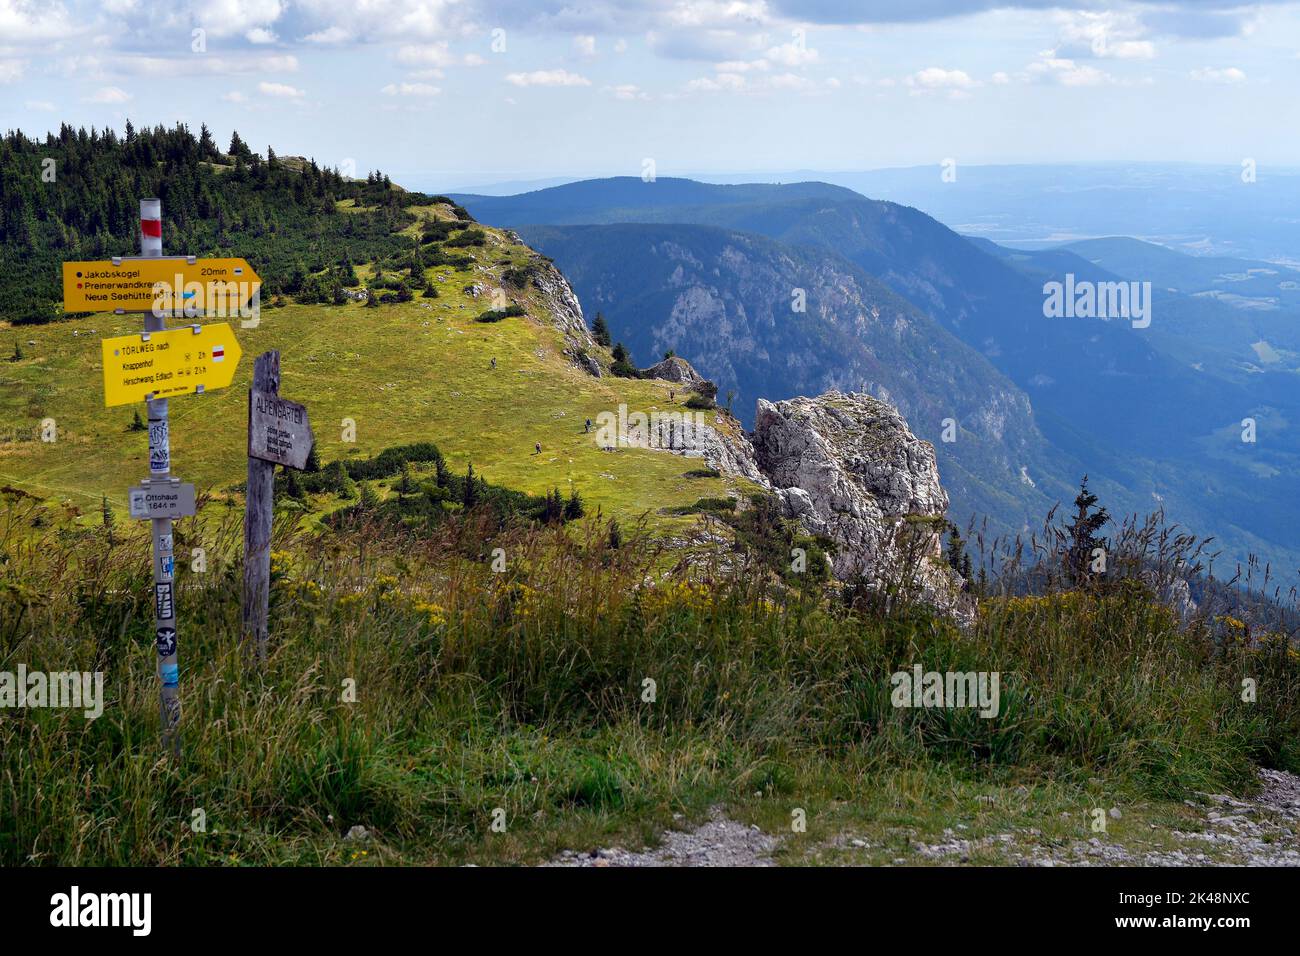 Austria, Rax mountain in Lower Austria, signposts with times to various destinations Stock Photo